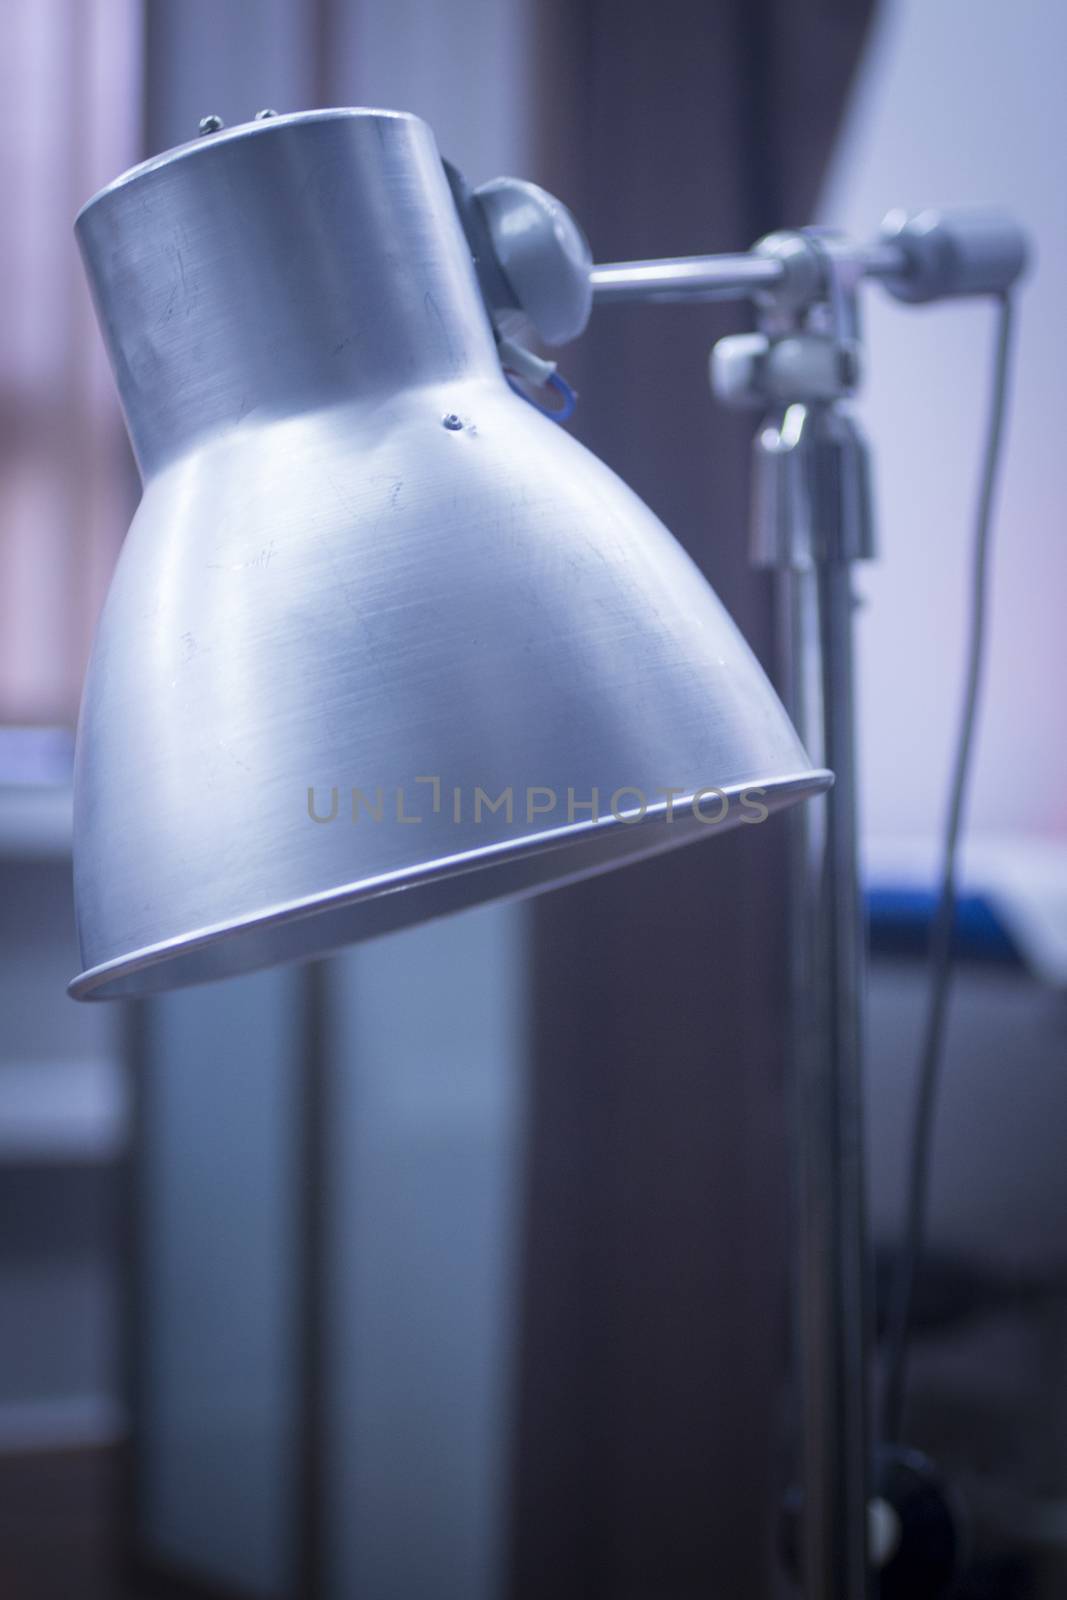 Physiotherapy heat medical rehabilitation lamp in hospital clinic in artistic tones. 